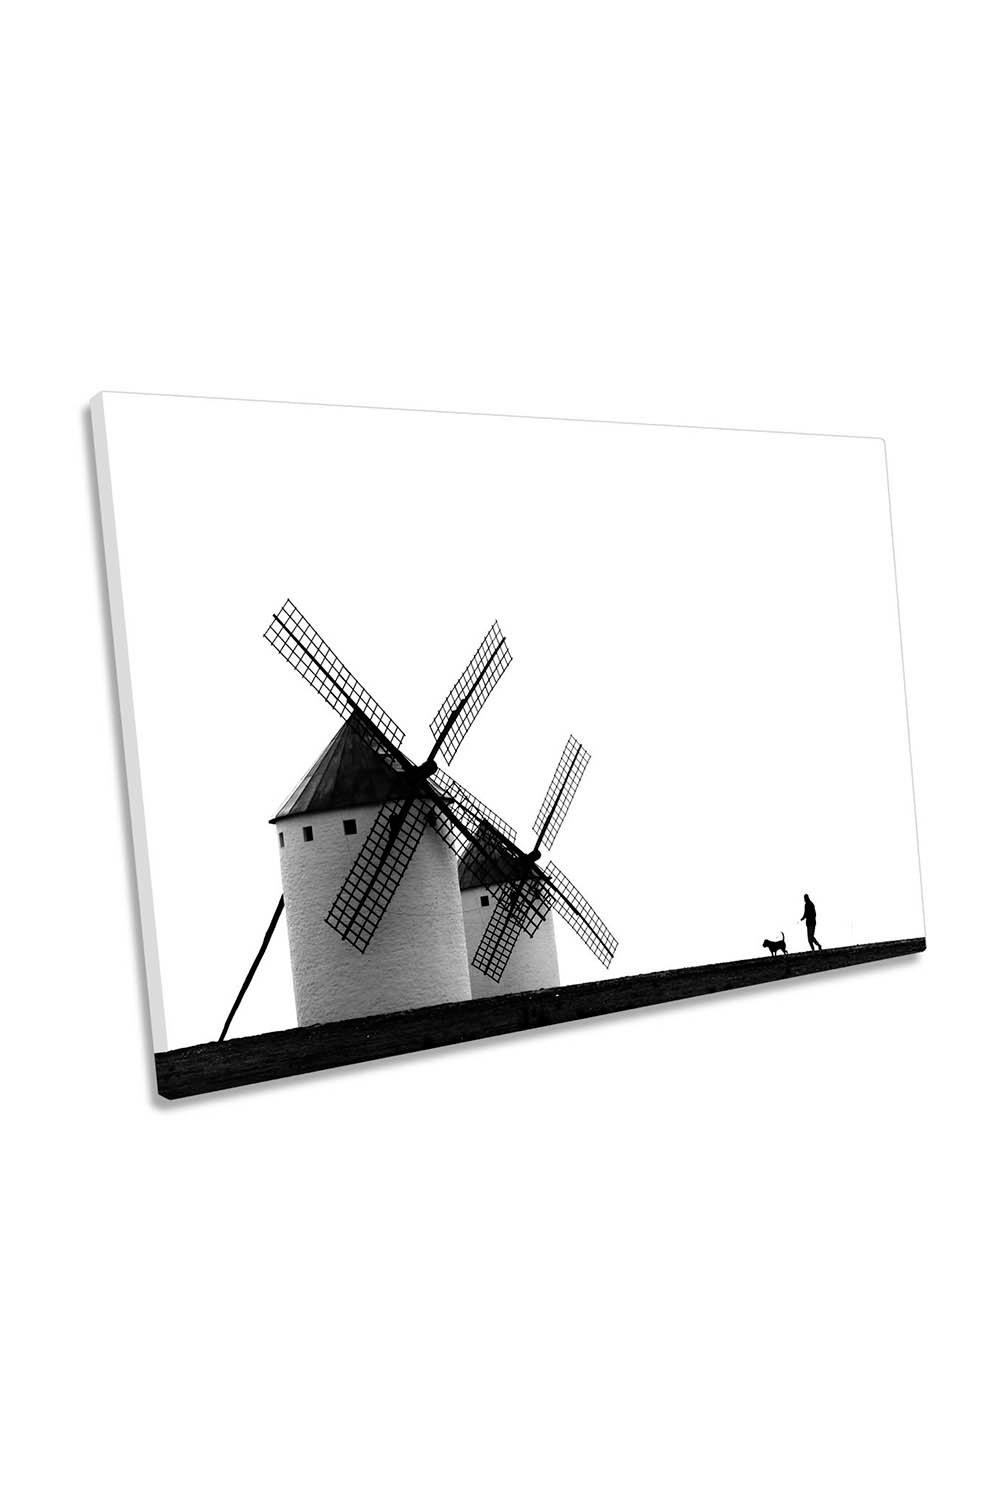 The Man the Dog and the Windmills Canvas Wall Art Picture Print